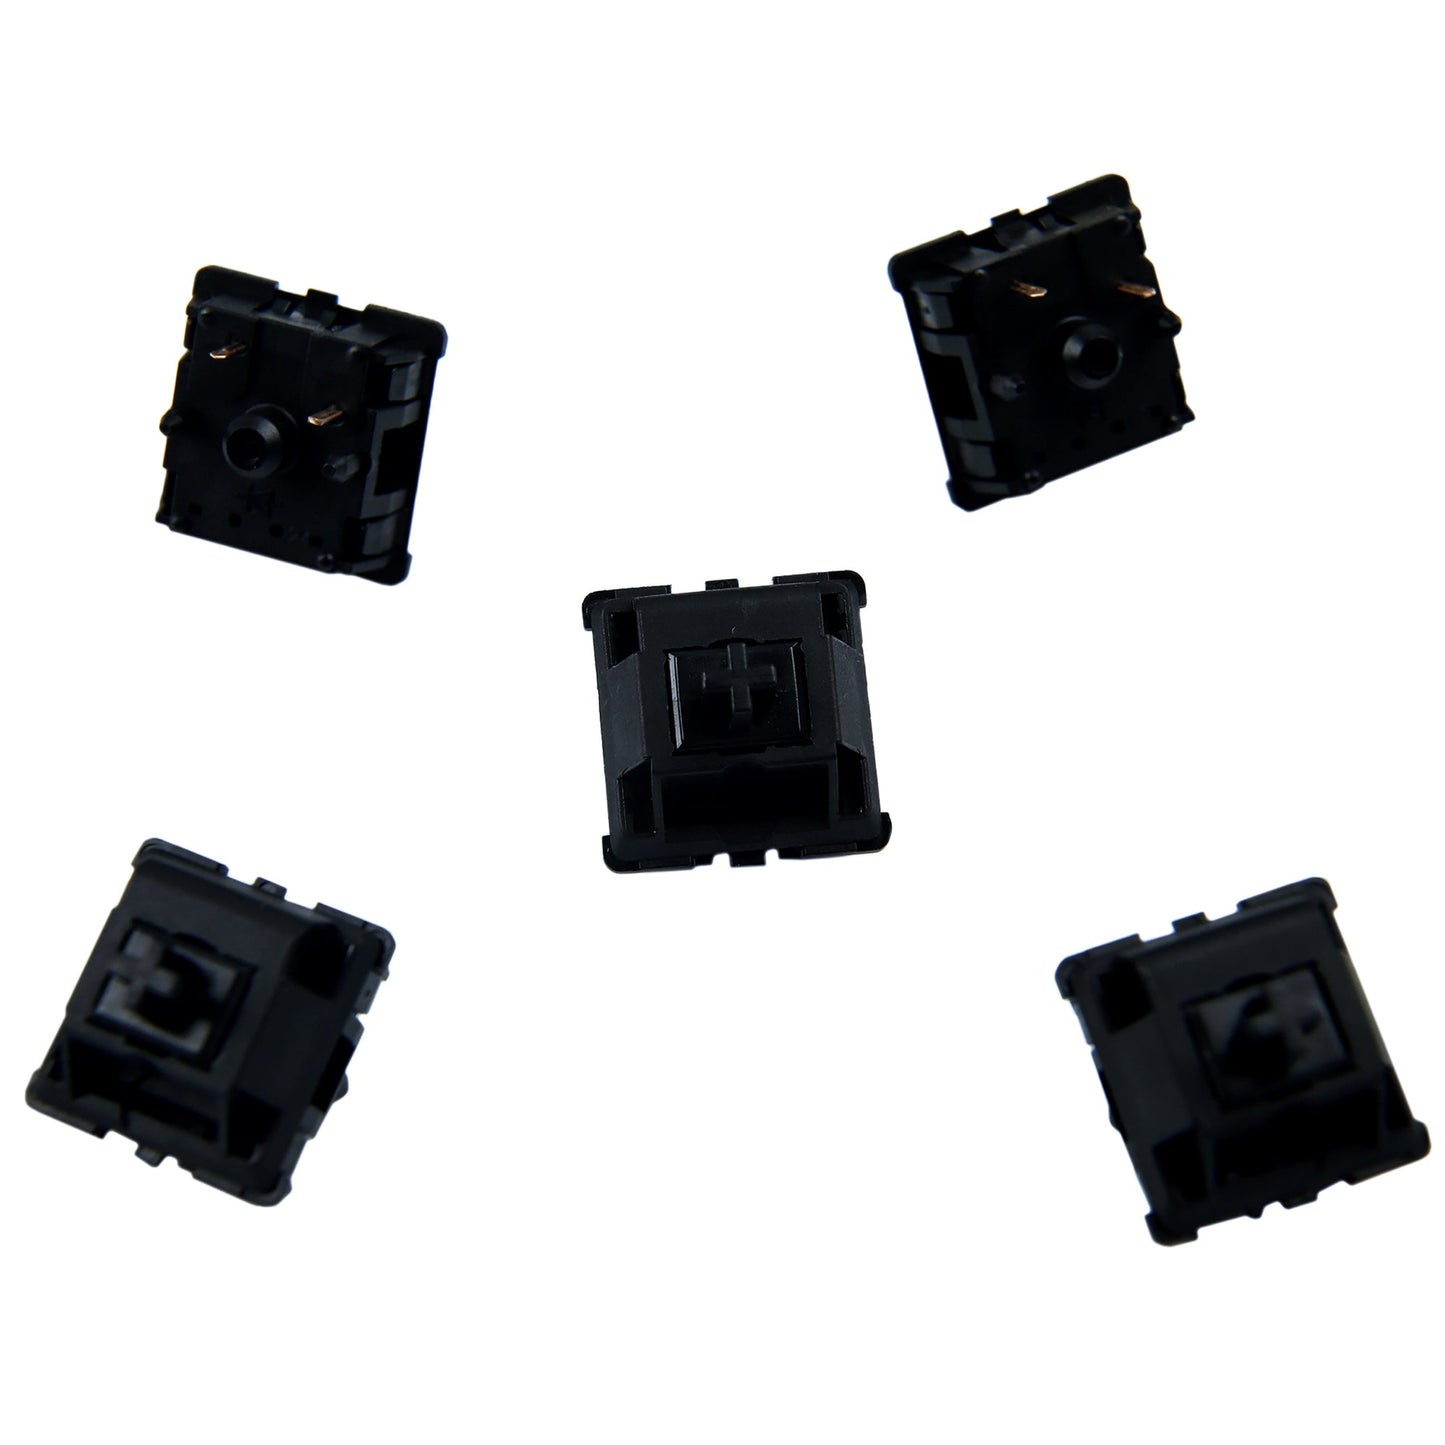 JWK C v2 Black(Lubed Linear 5 Pin Switches) - IPOPULARSHOP